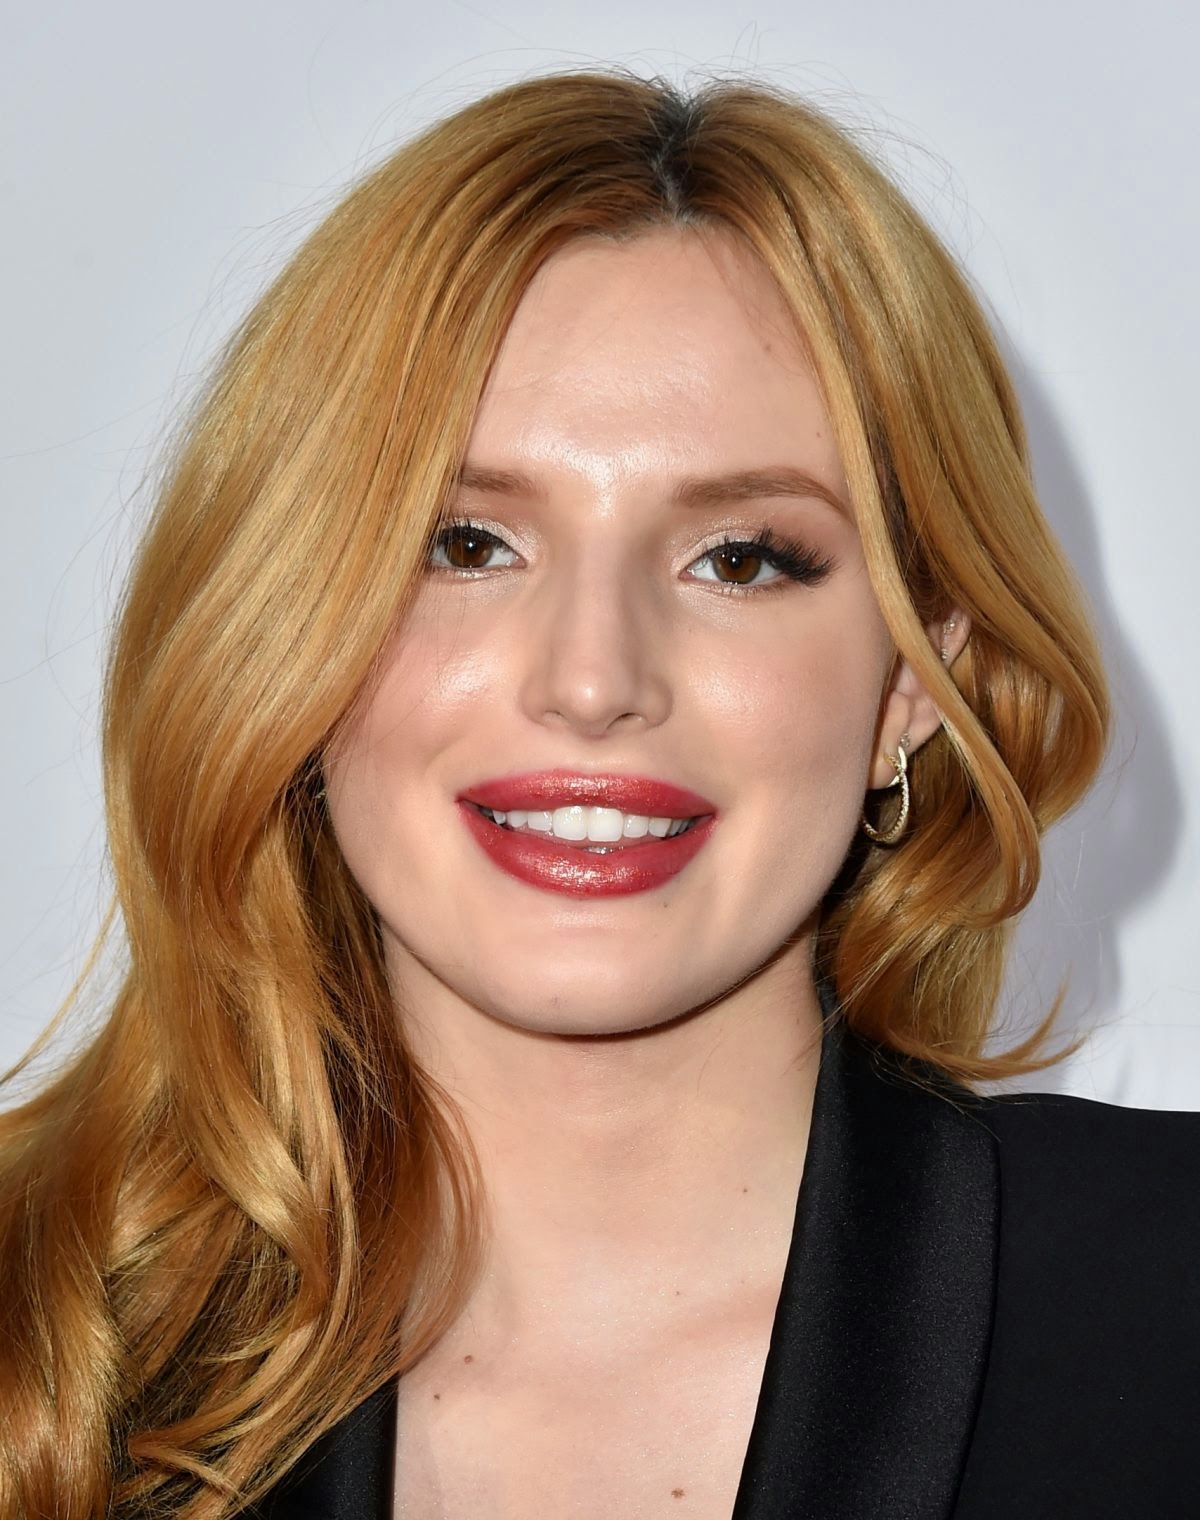 Happy Birthday to one of my favorites Bella Thorne!! Disney star all grown up!! 